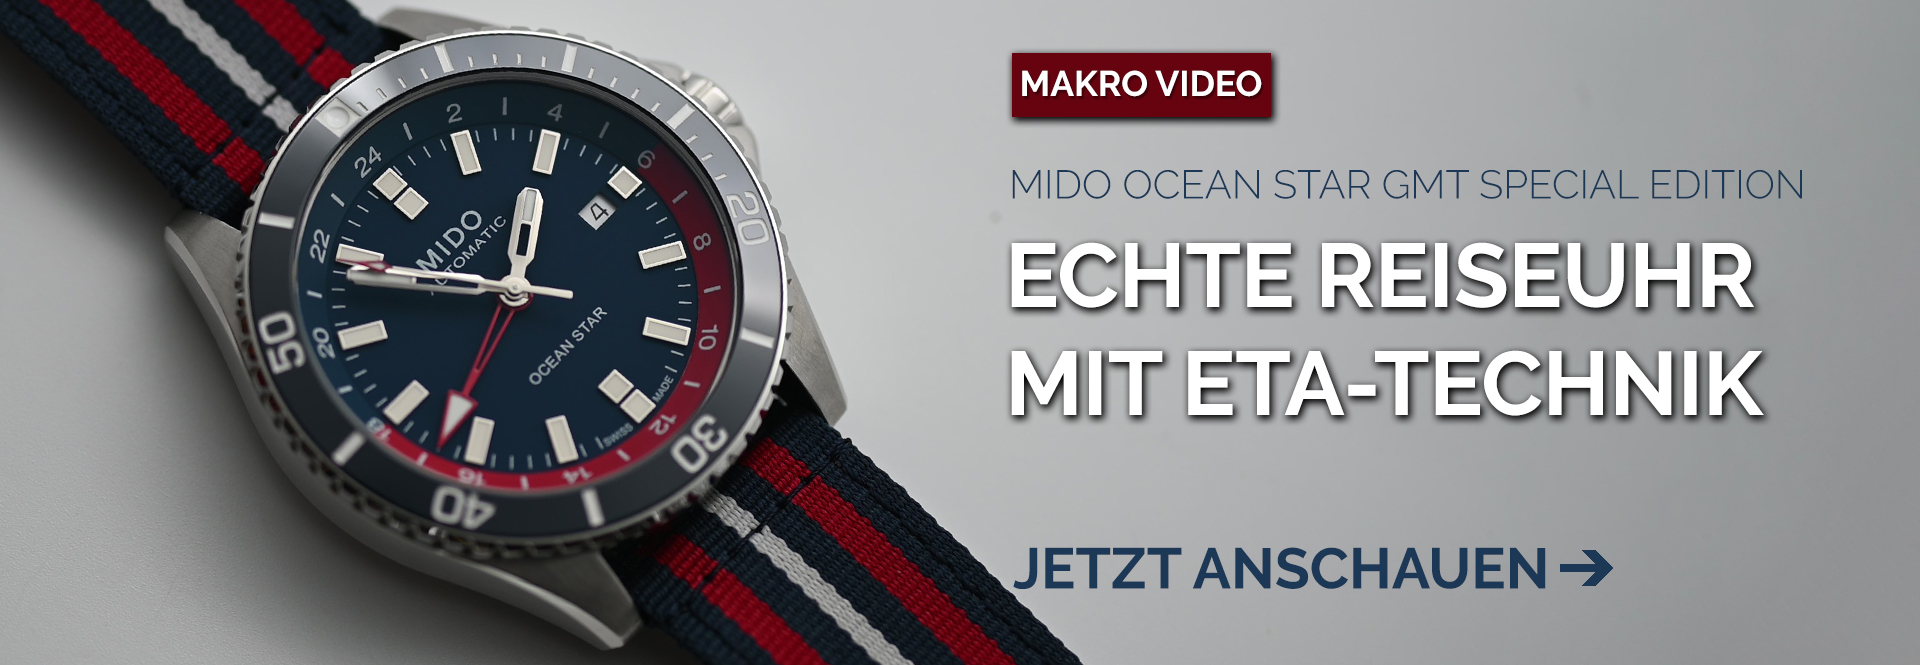 Mido Ocean Star GMT Special Edition stage